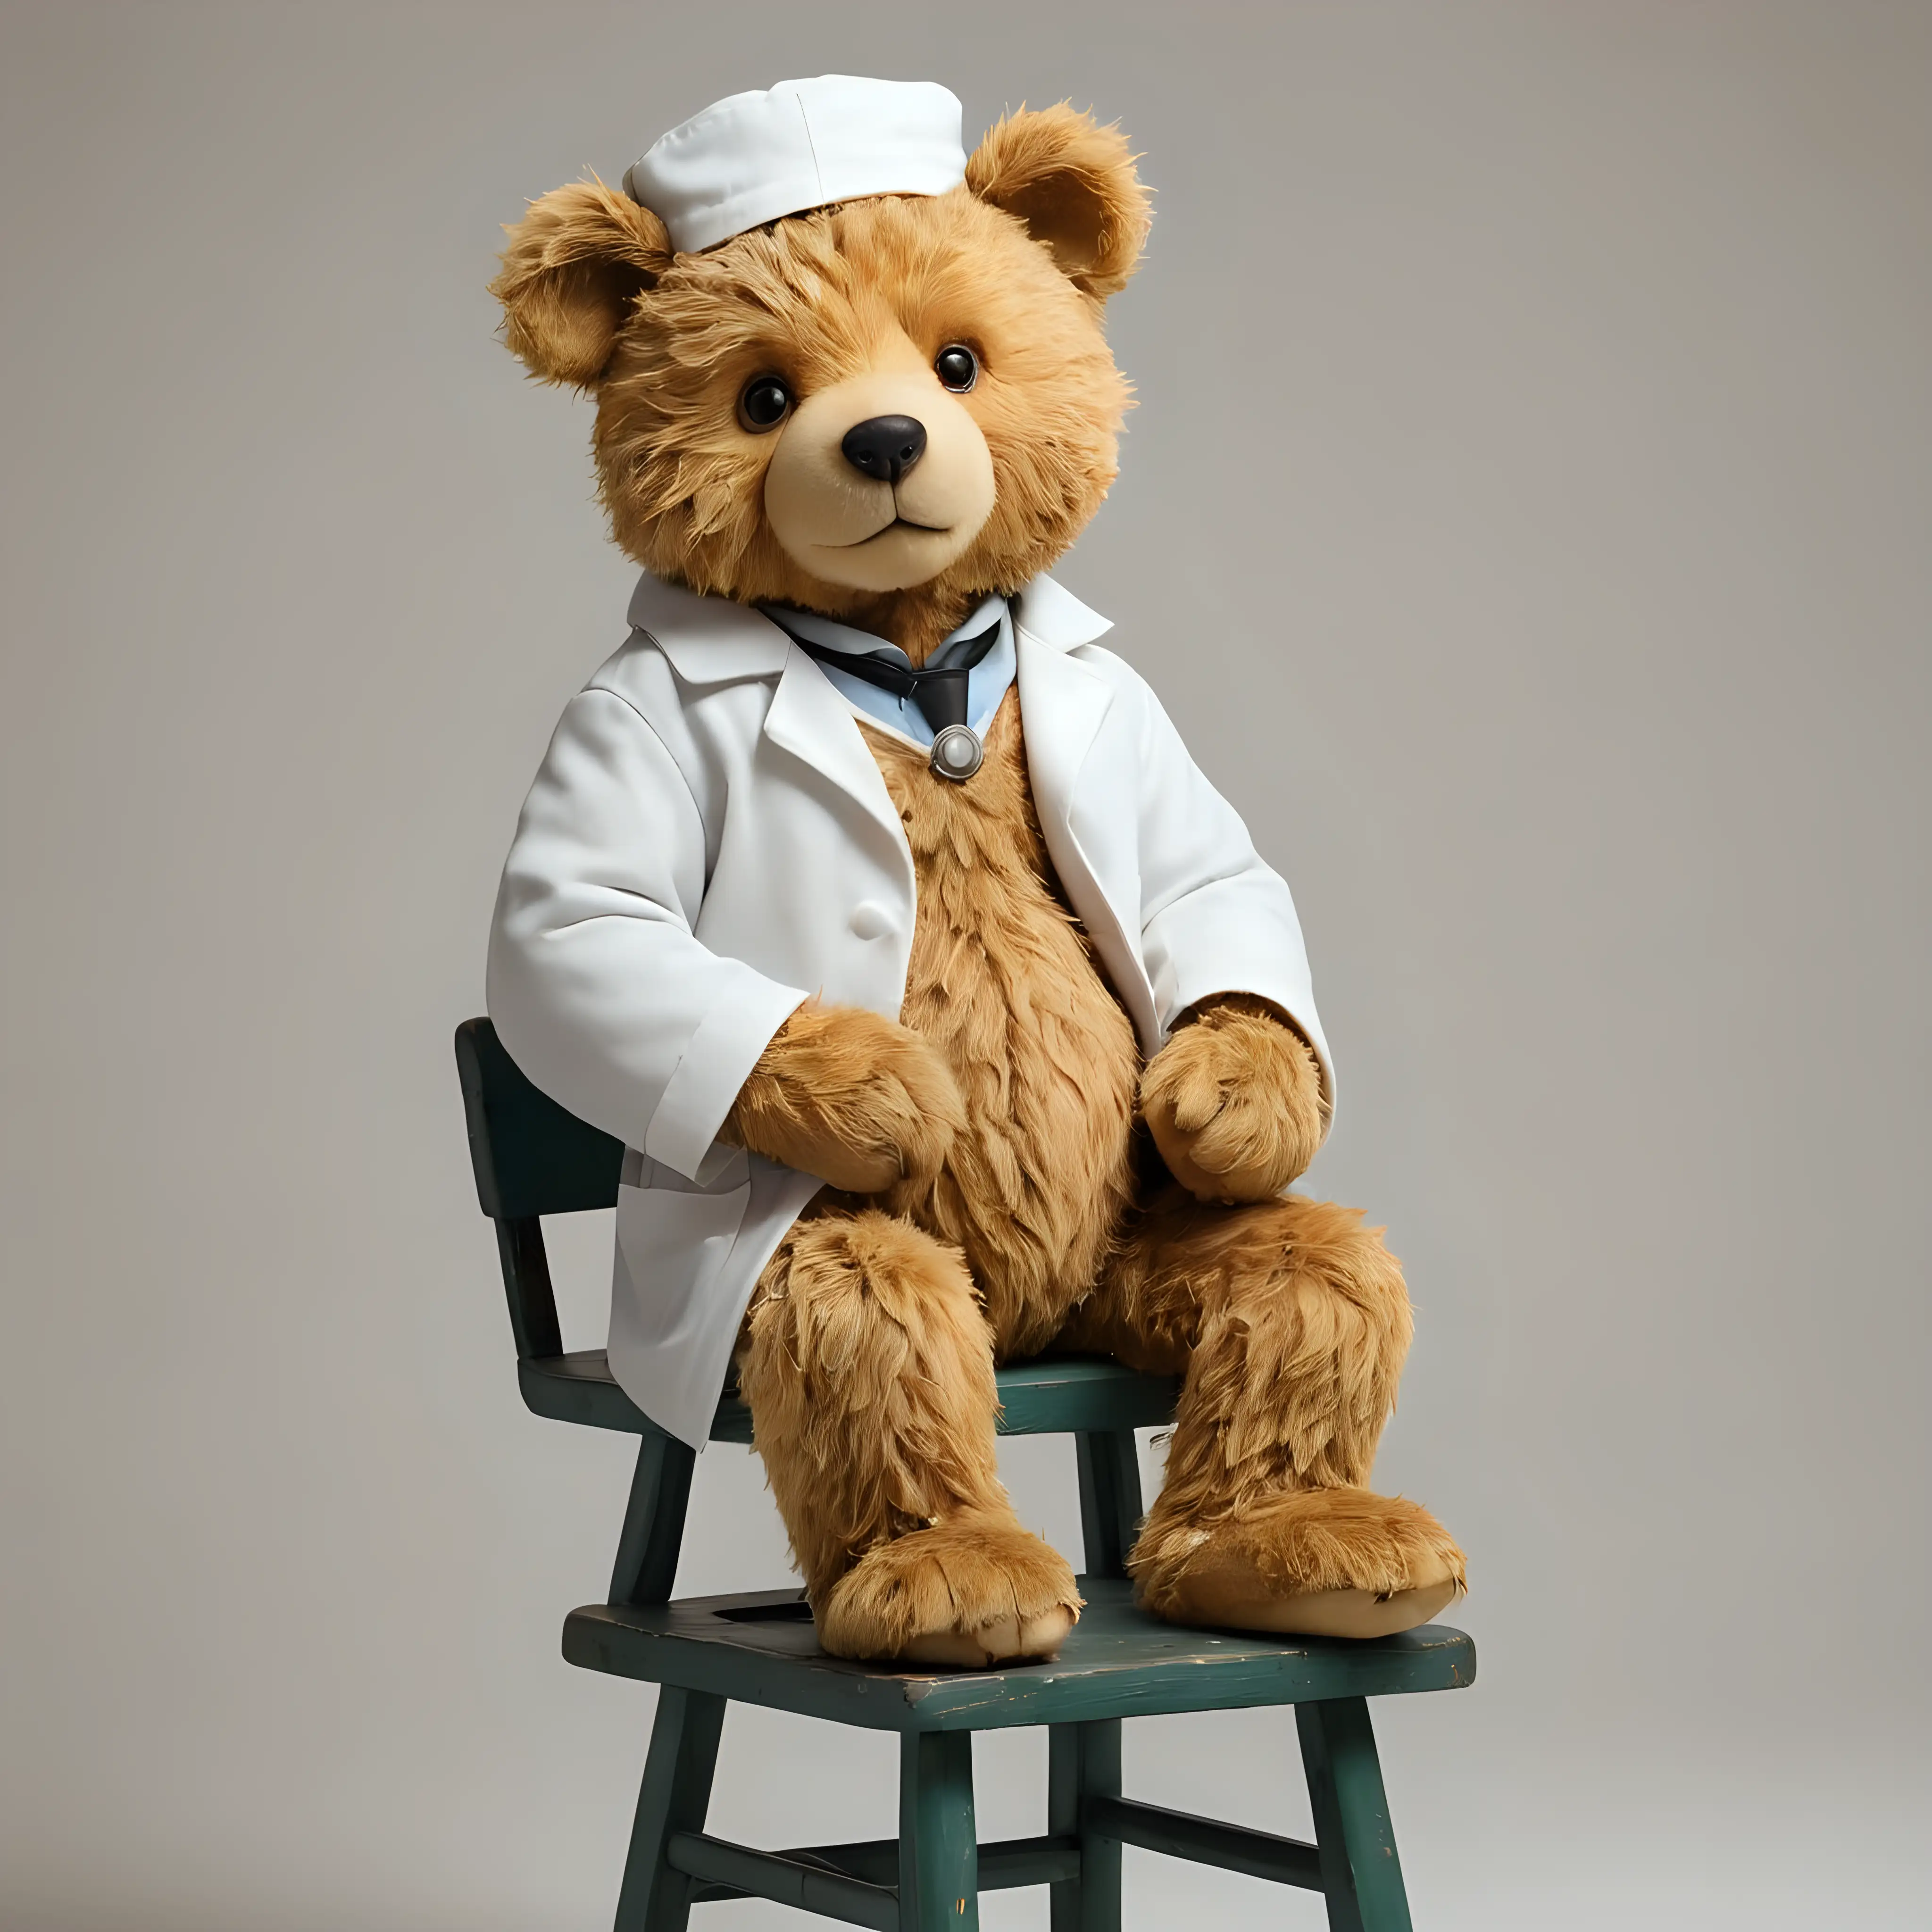 Vintage Teddy Bear Doctor with Stethoscope on Stool